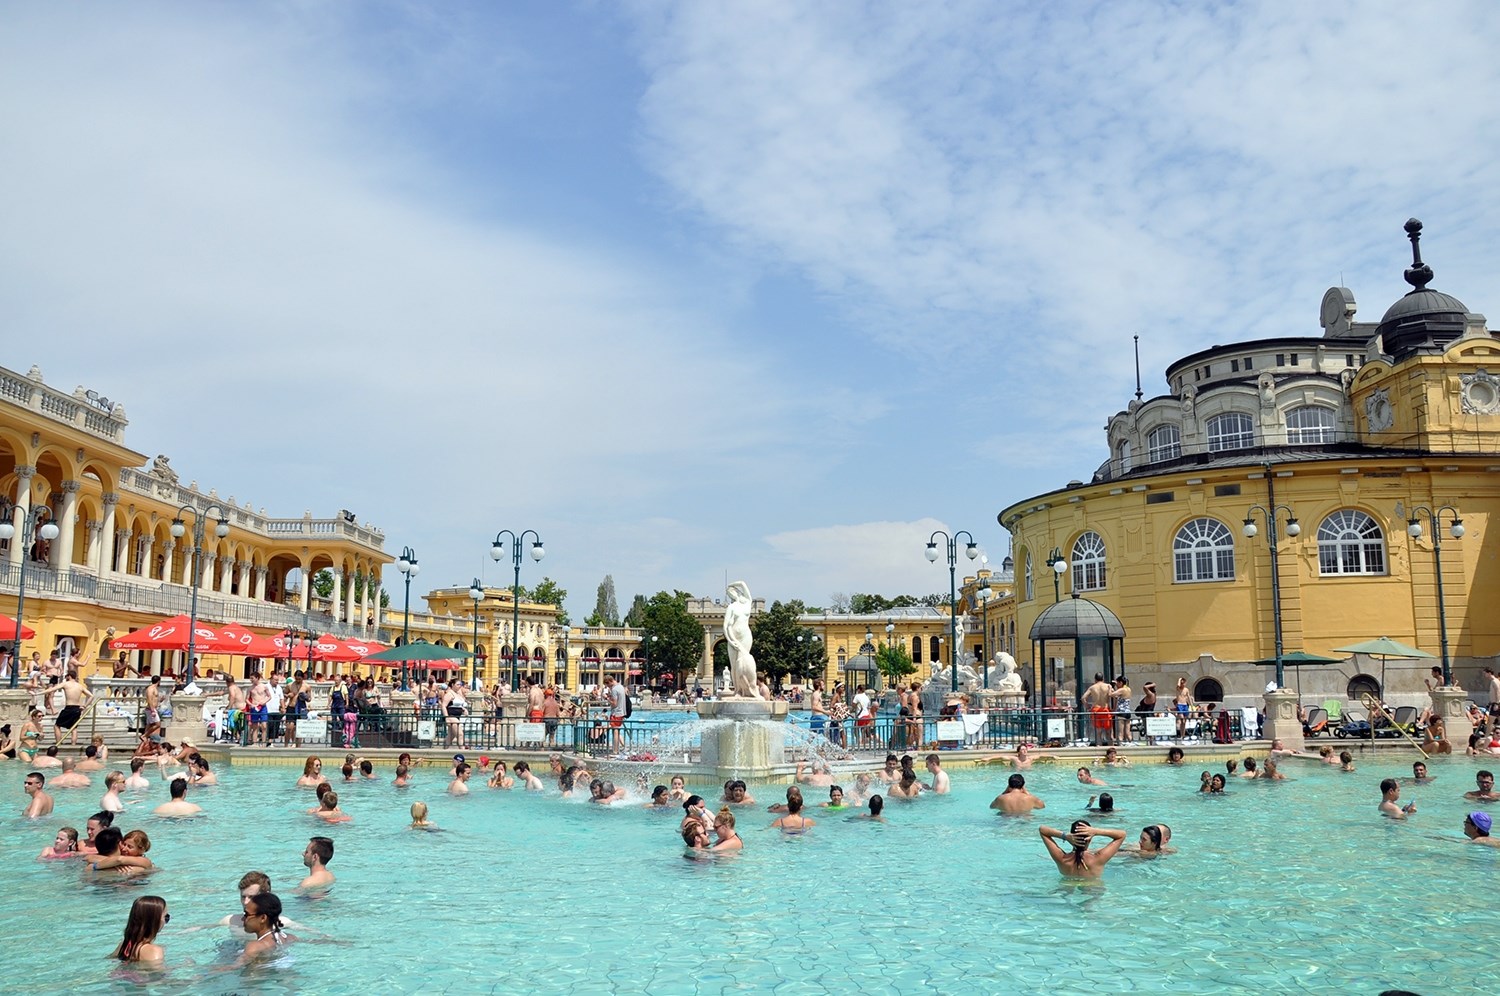 Széchenyi Thermal Bath Things to Do in Budapest Travel